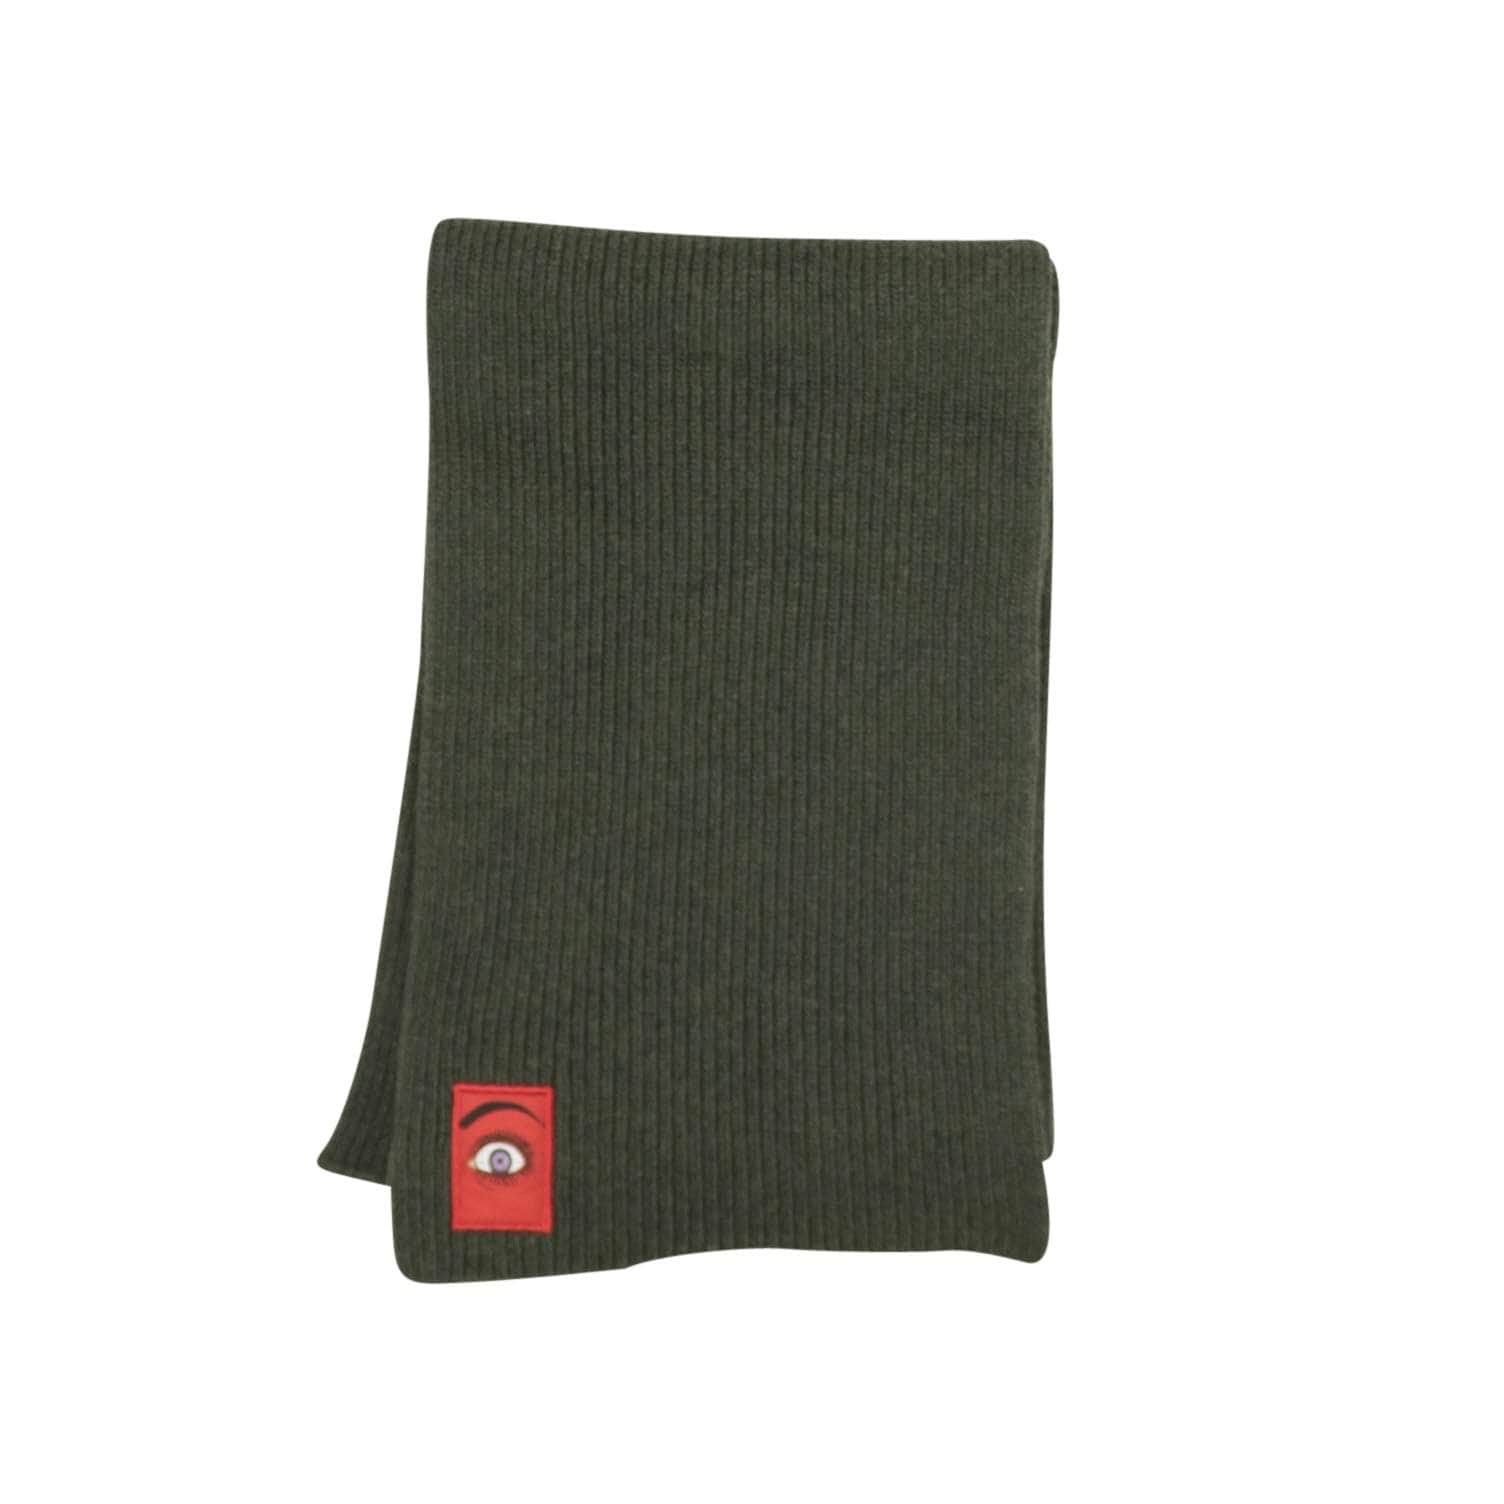 Marcelo Burlon channelenable-all, chicmi, couponcollection, gender-mens, main-accessories, marcelo-burlon, mens-shoes, size-os, uncategorized, under-250 OS Green Ribbed Red Eye Patch Scarf 82NGG-MB-3115/OS 82NGG-MB-3115/OS